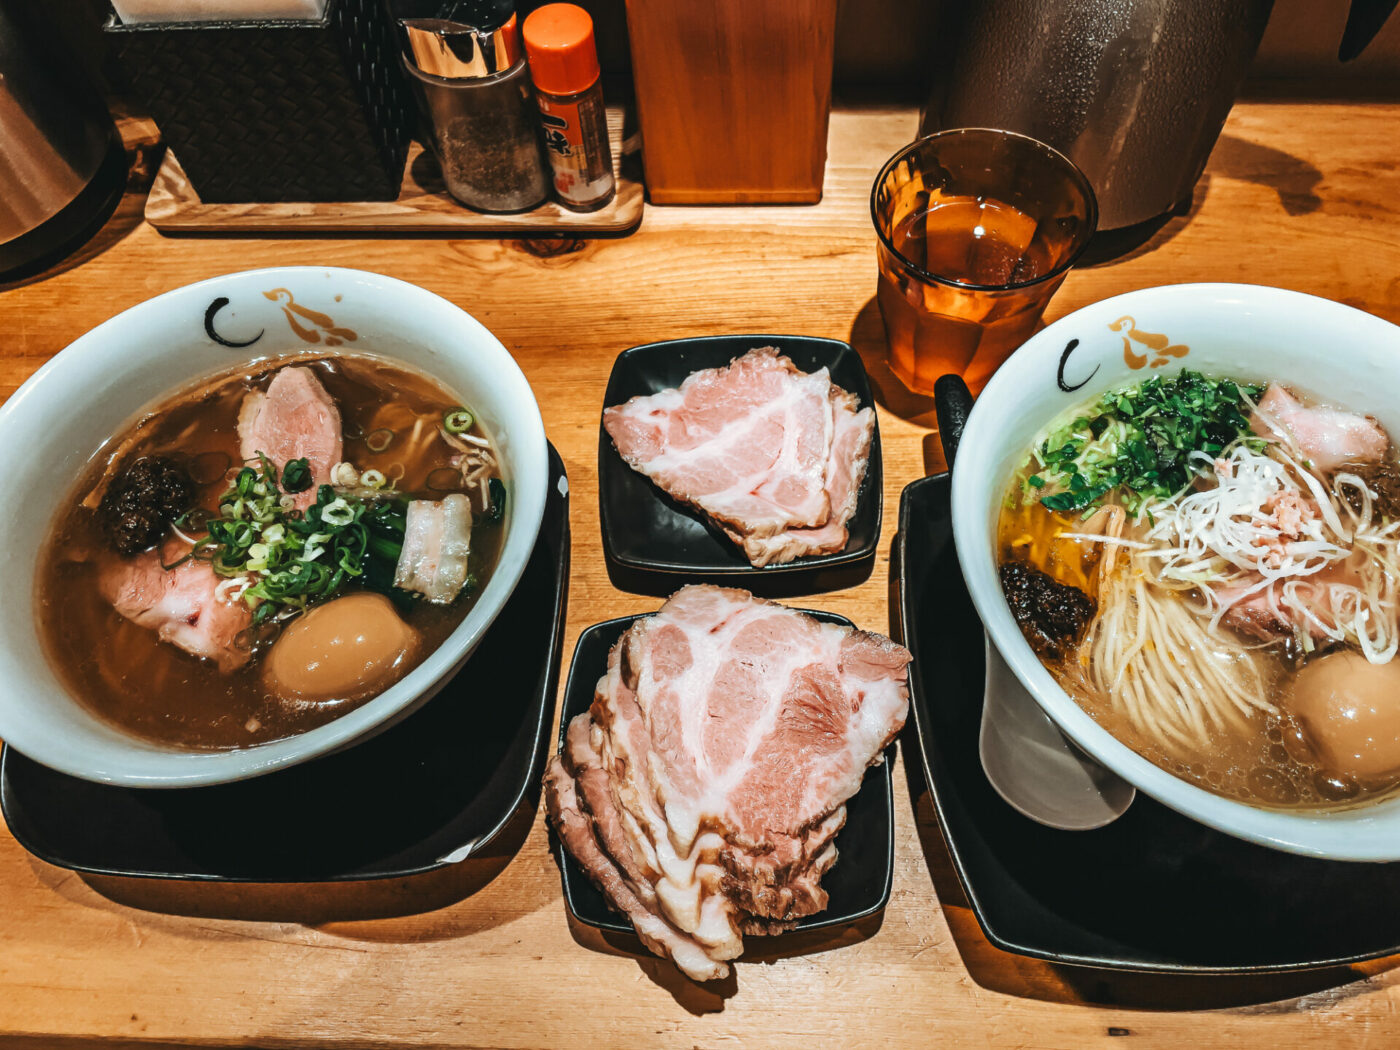 This ramen is a must-try when visiting Tokyo